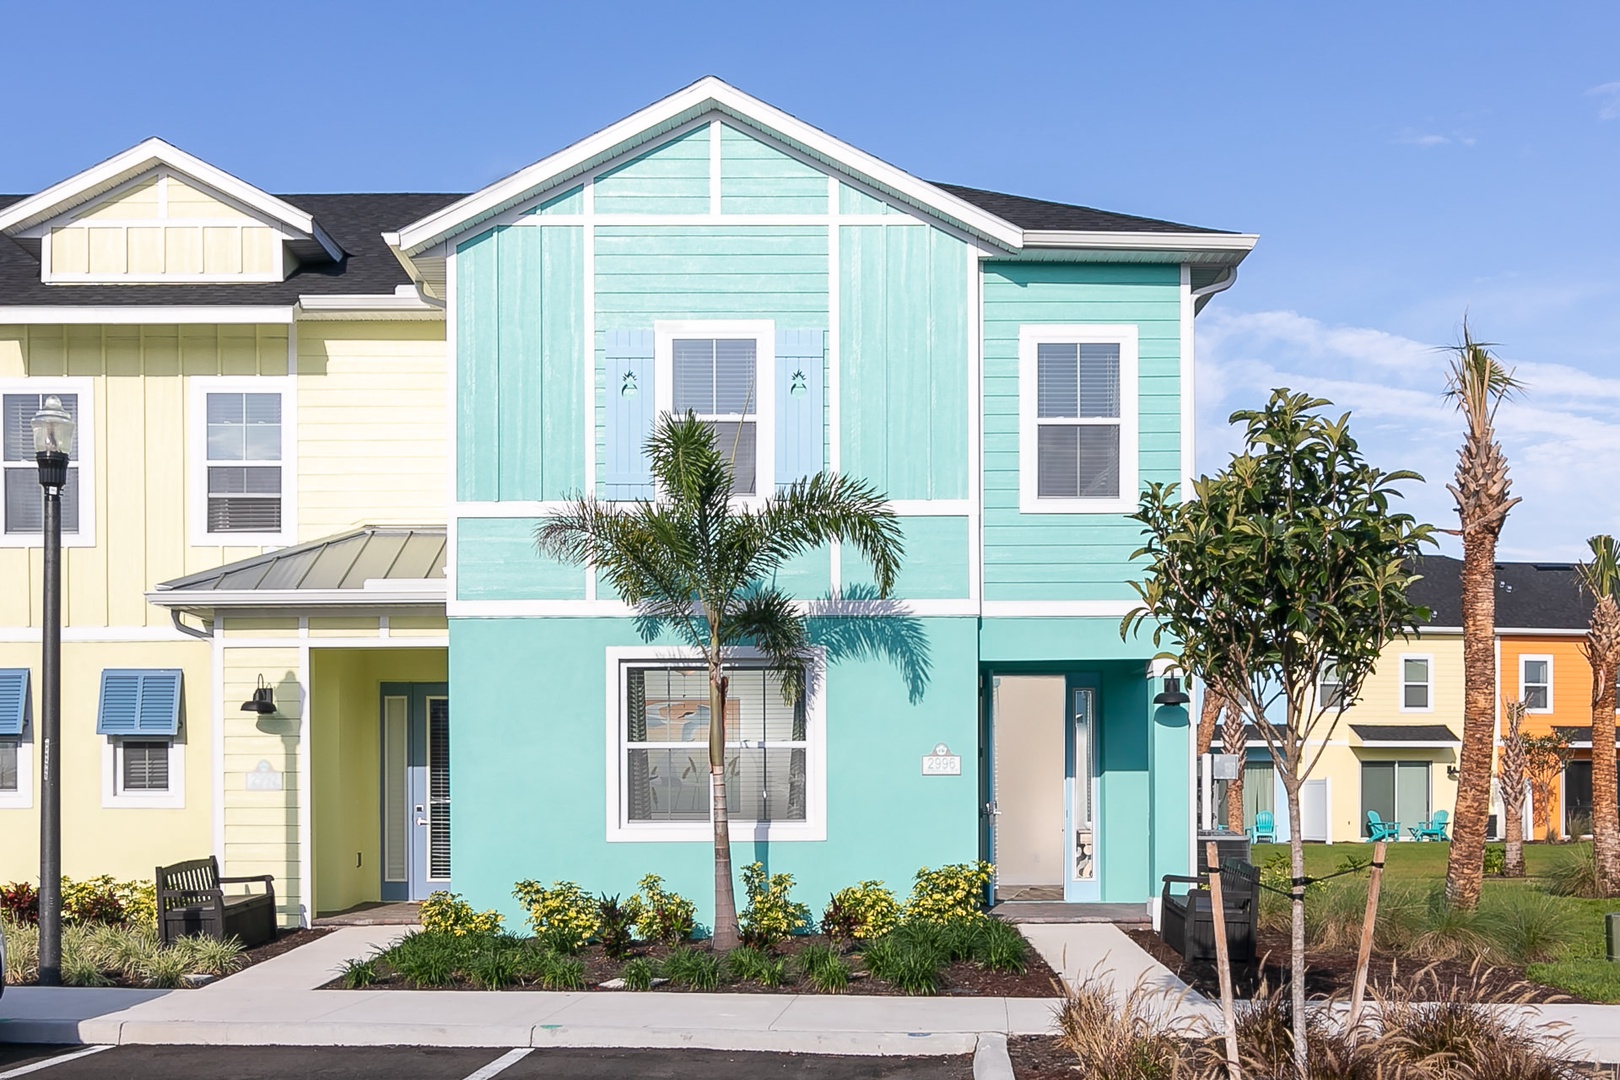 Welcome to Caribbean Summer, your tropical Margaritaville home away from home!